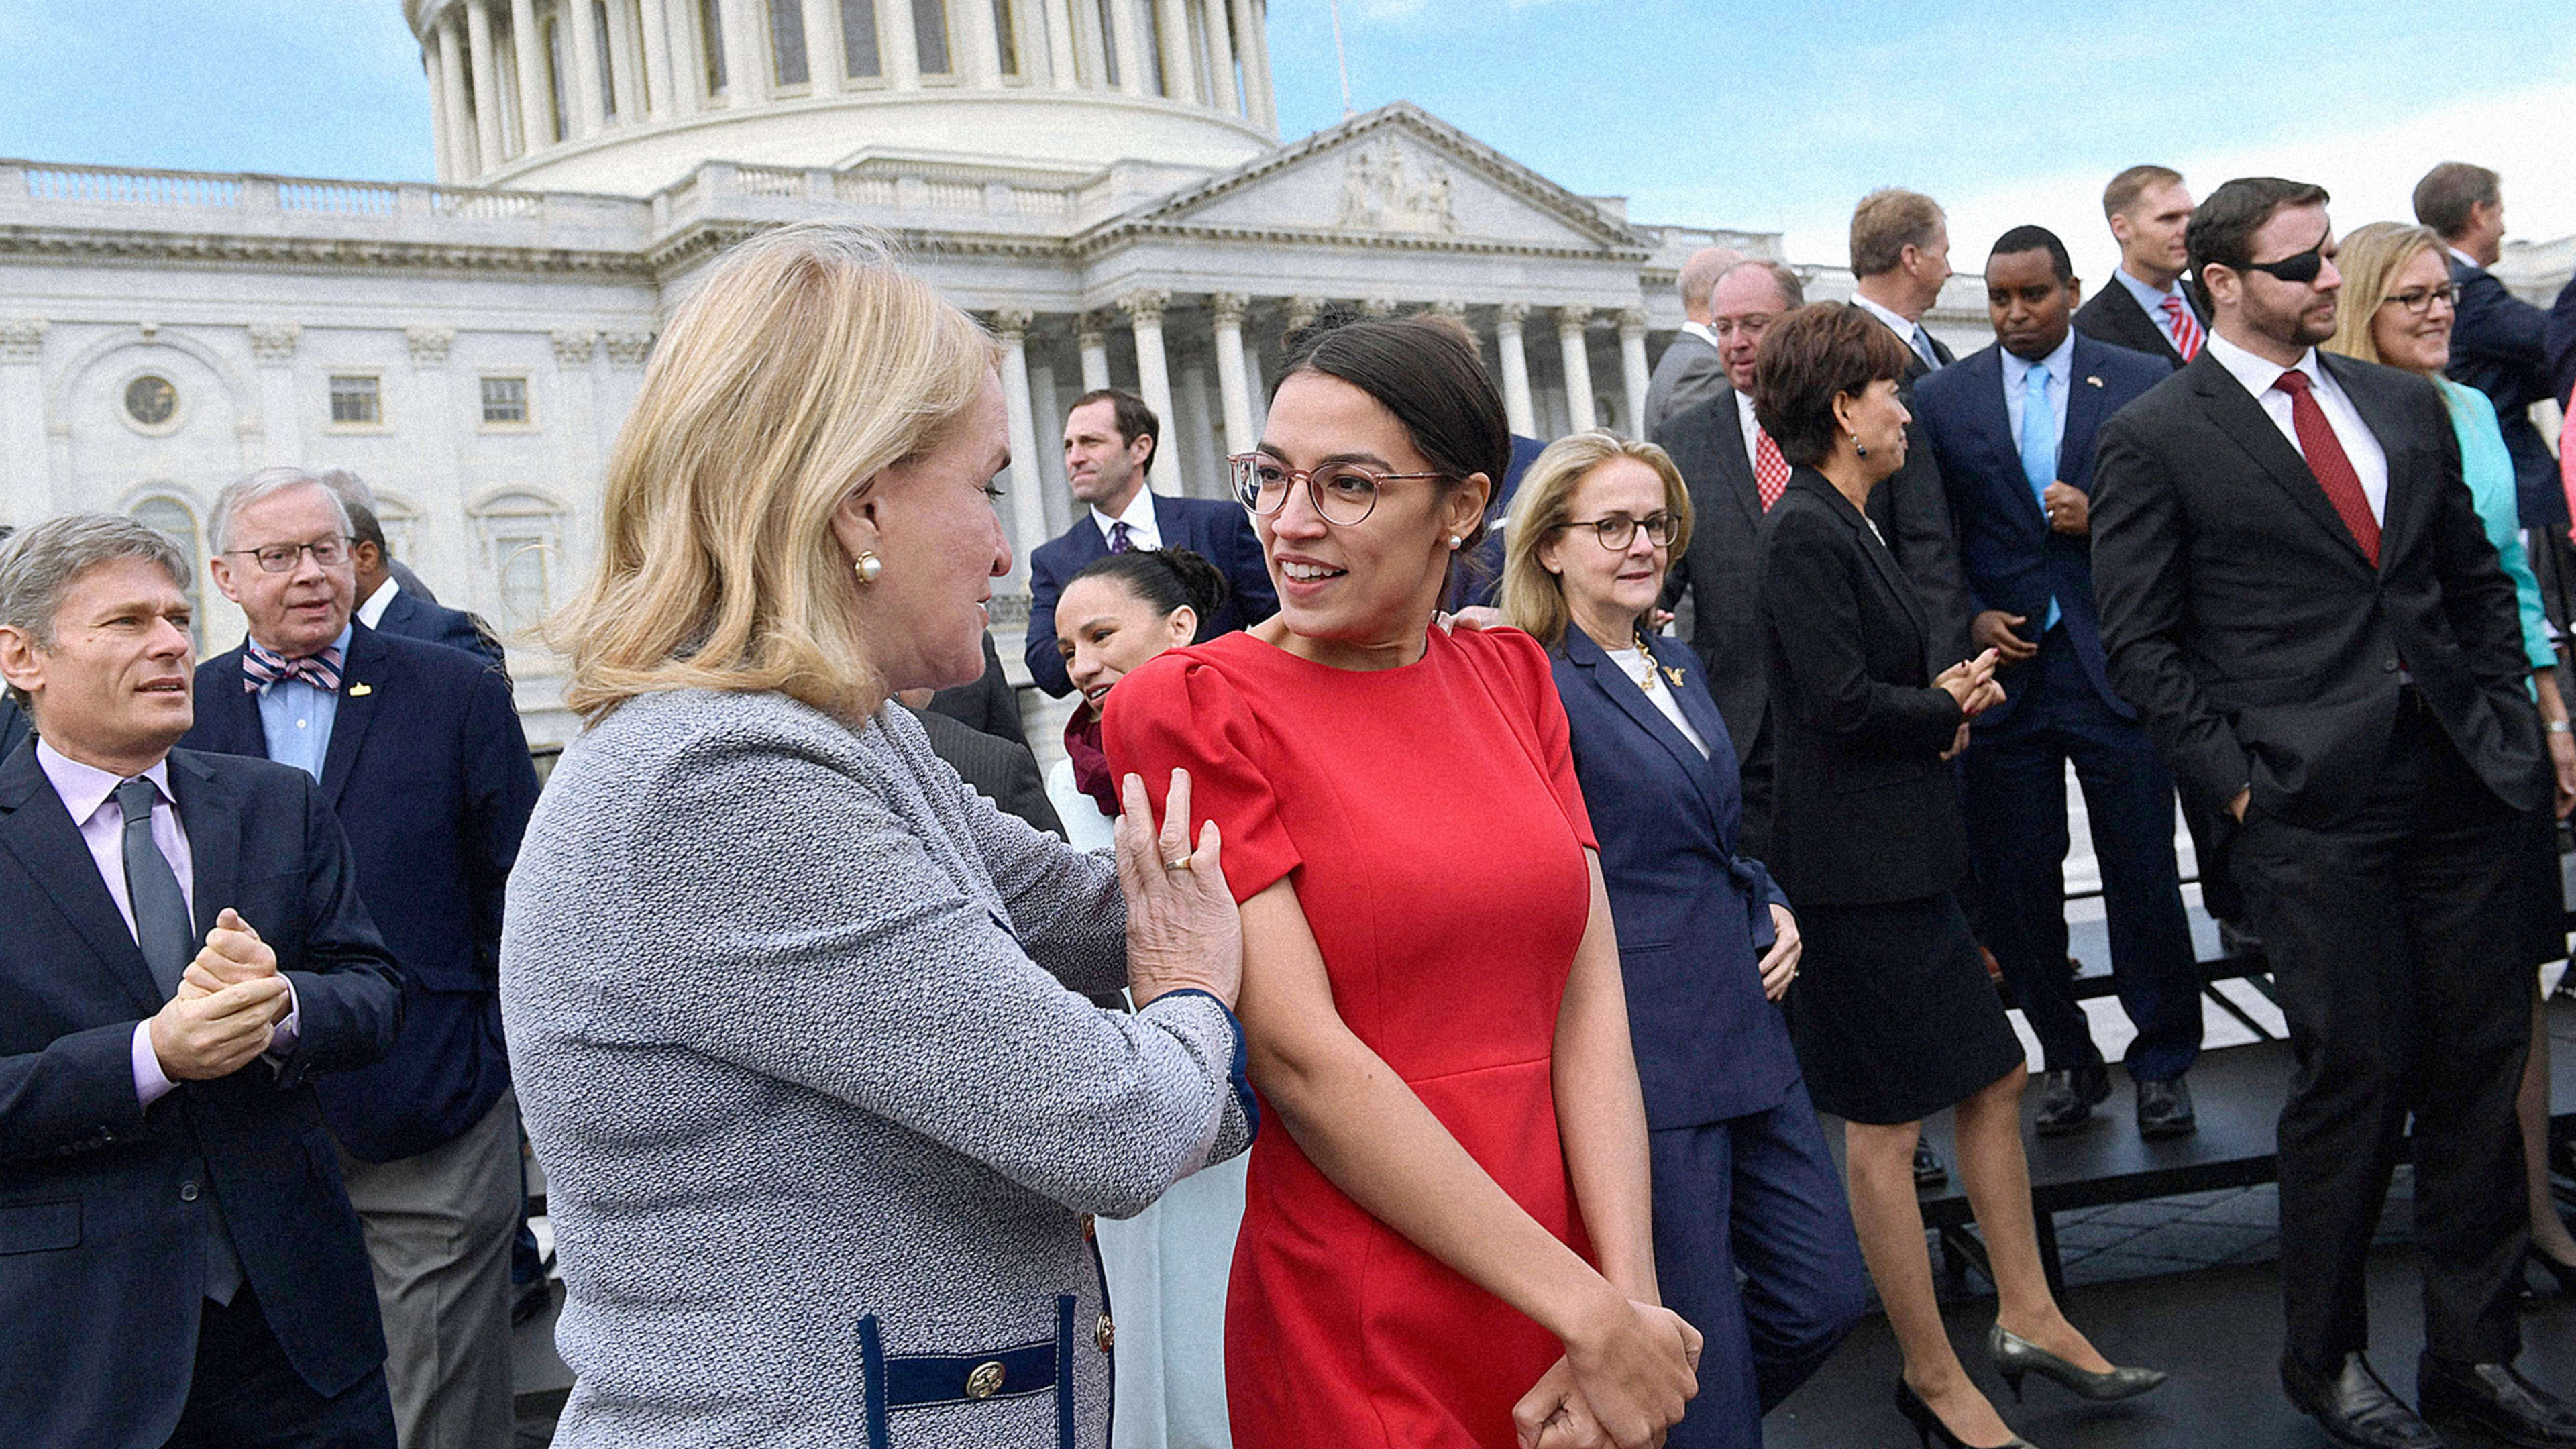 Why is the right-wing obsessed with Alexandria Ocasio-Cortez’s clothes?